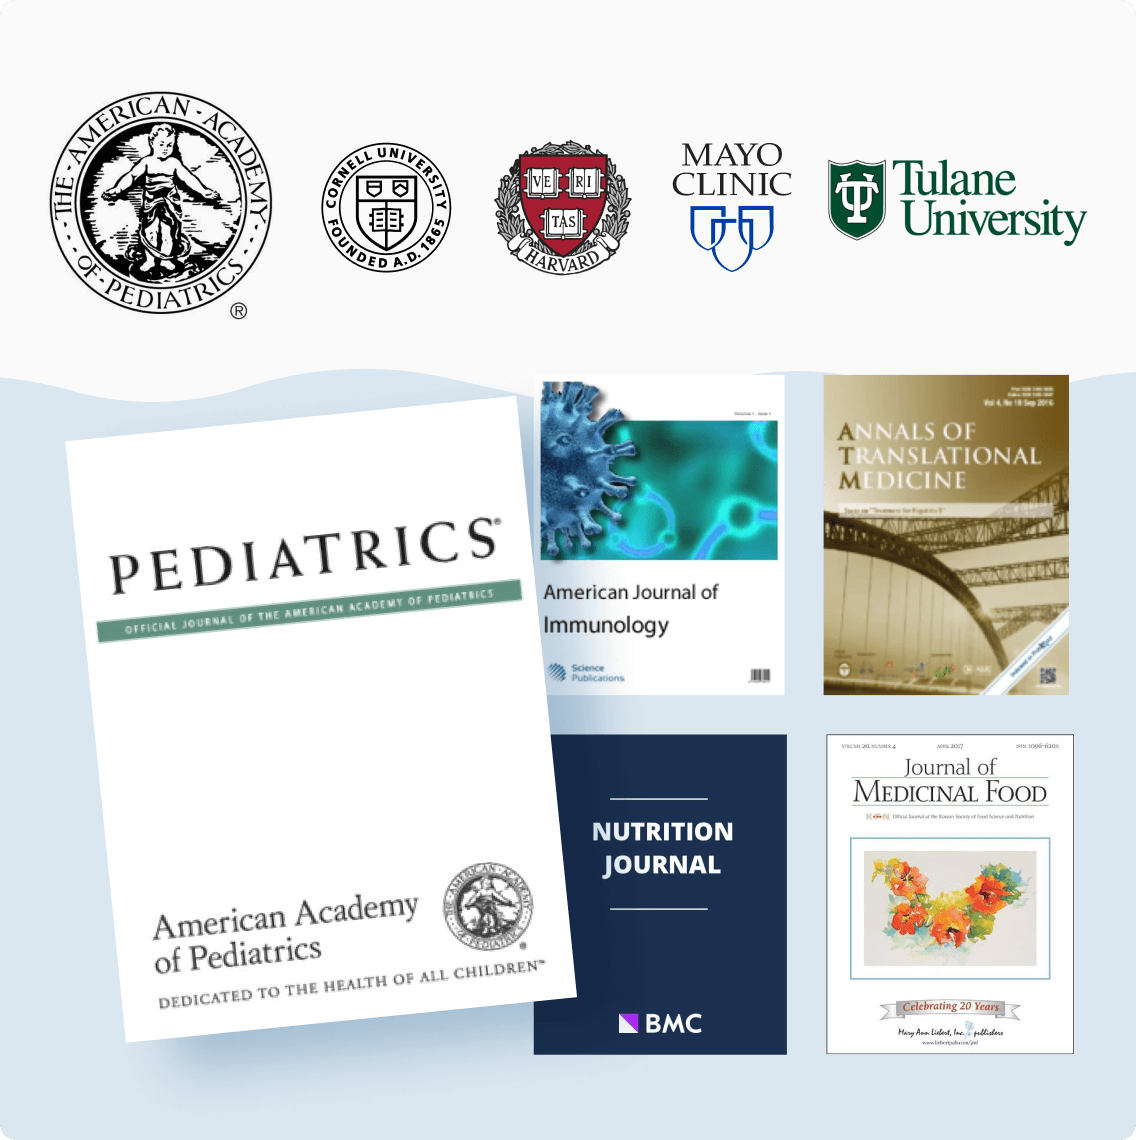 logos and images of universities and hospitals